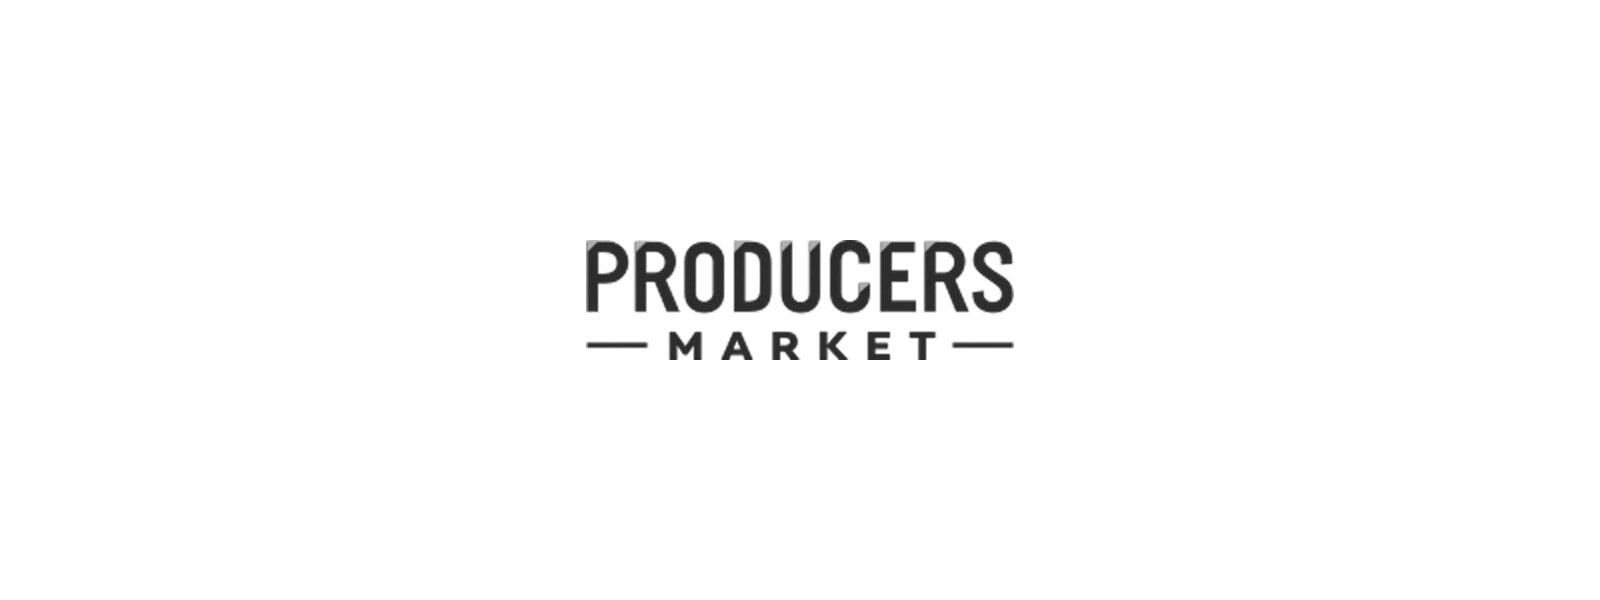 Producers Market Online Platform and Synthesis Organics